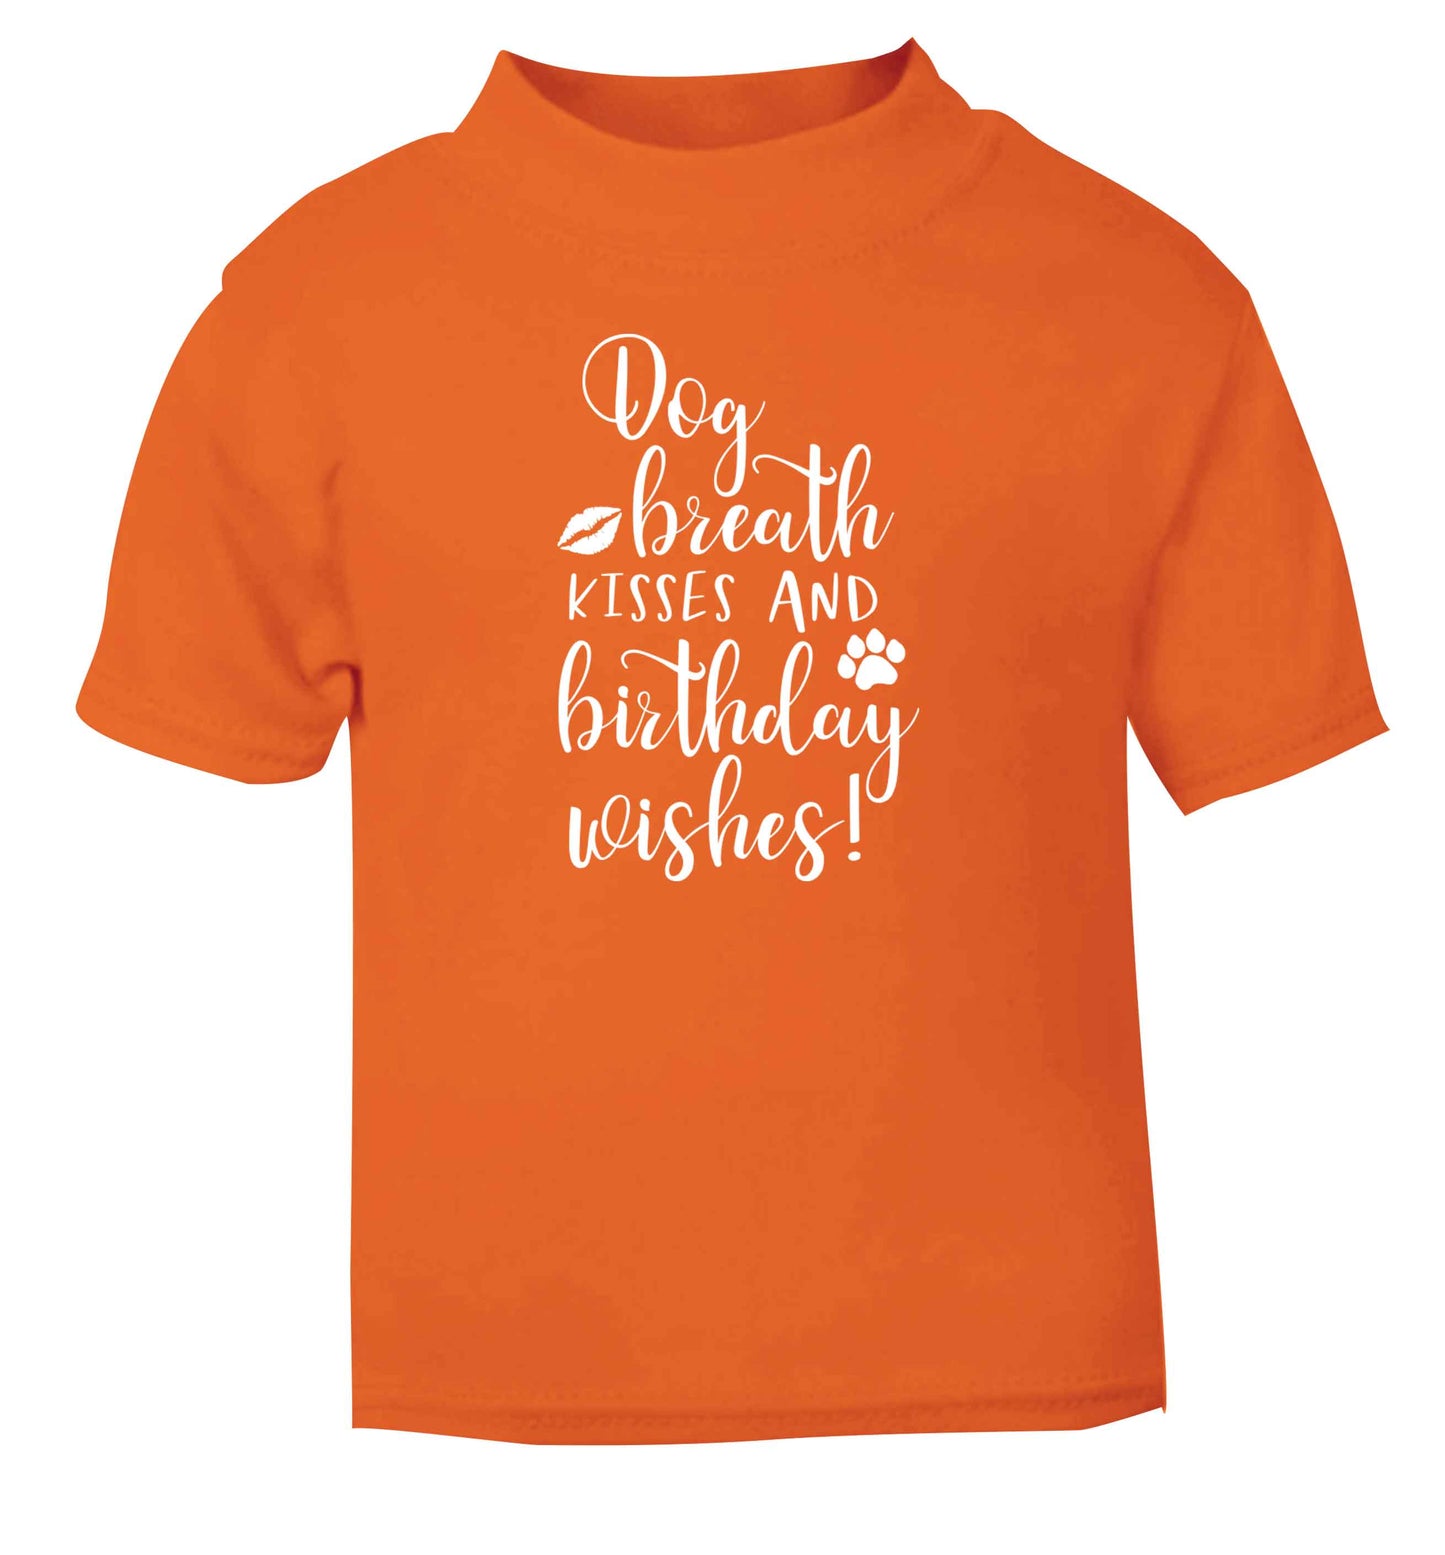 Dog breath kisses and christmas wishes orange Baby Toddler Tshirt 2 Years